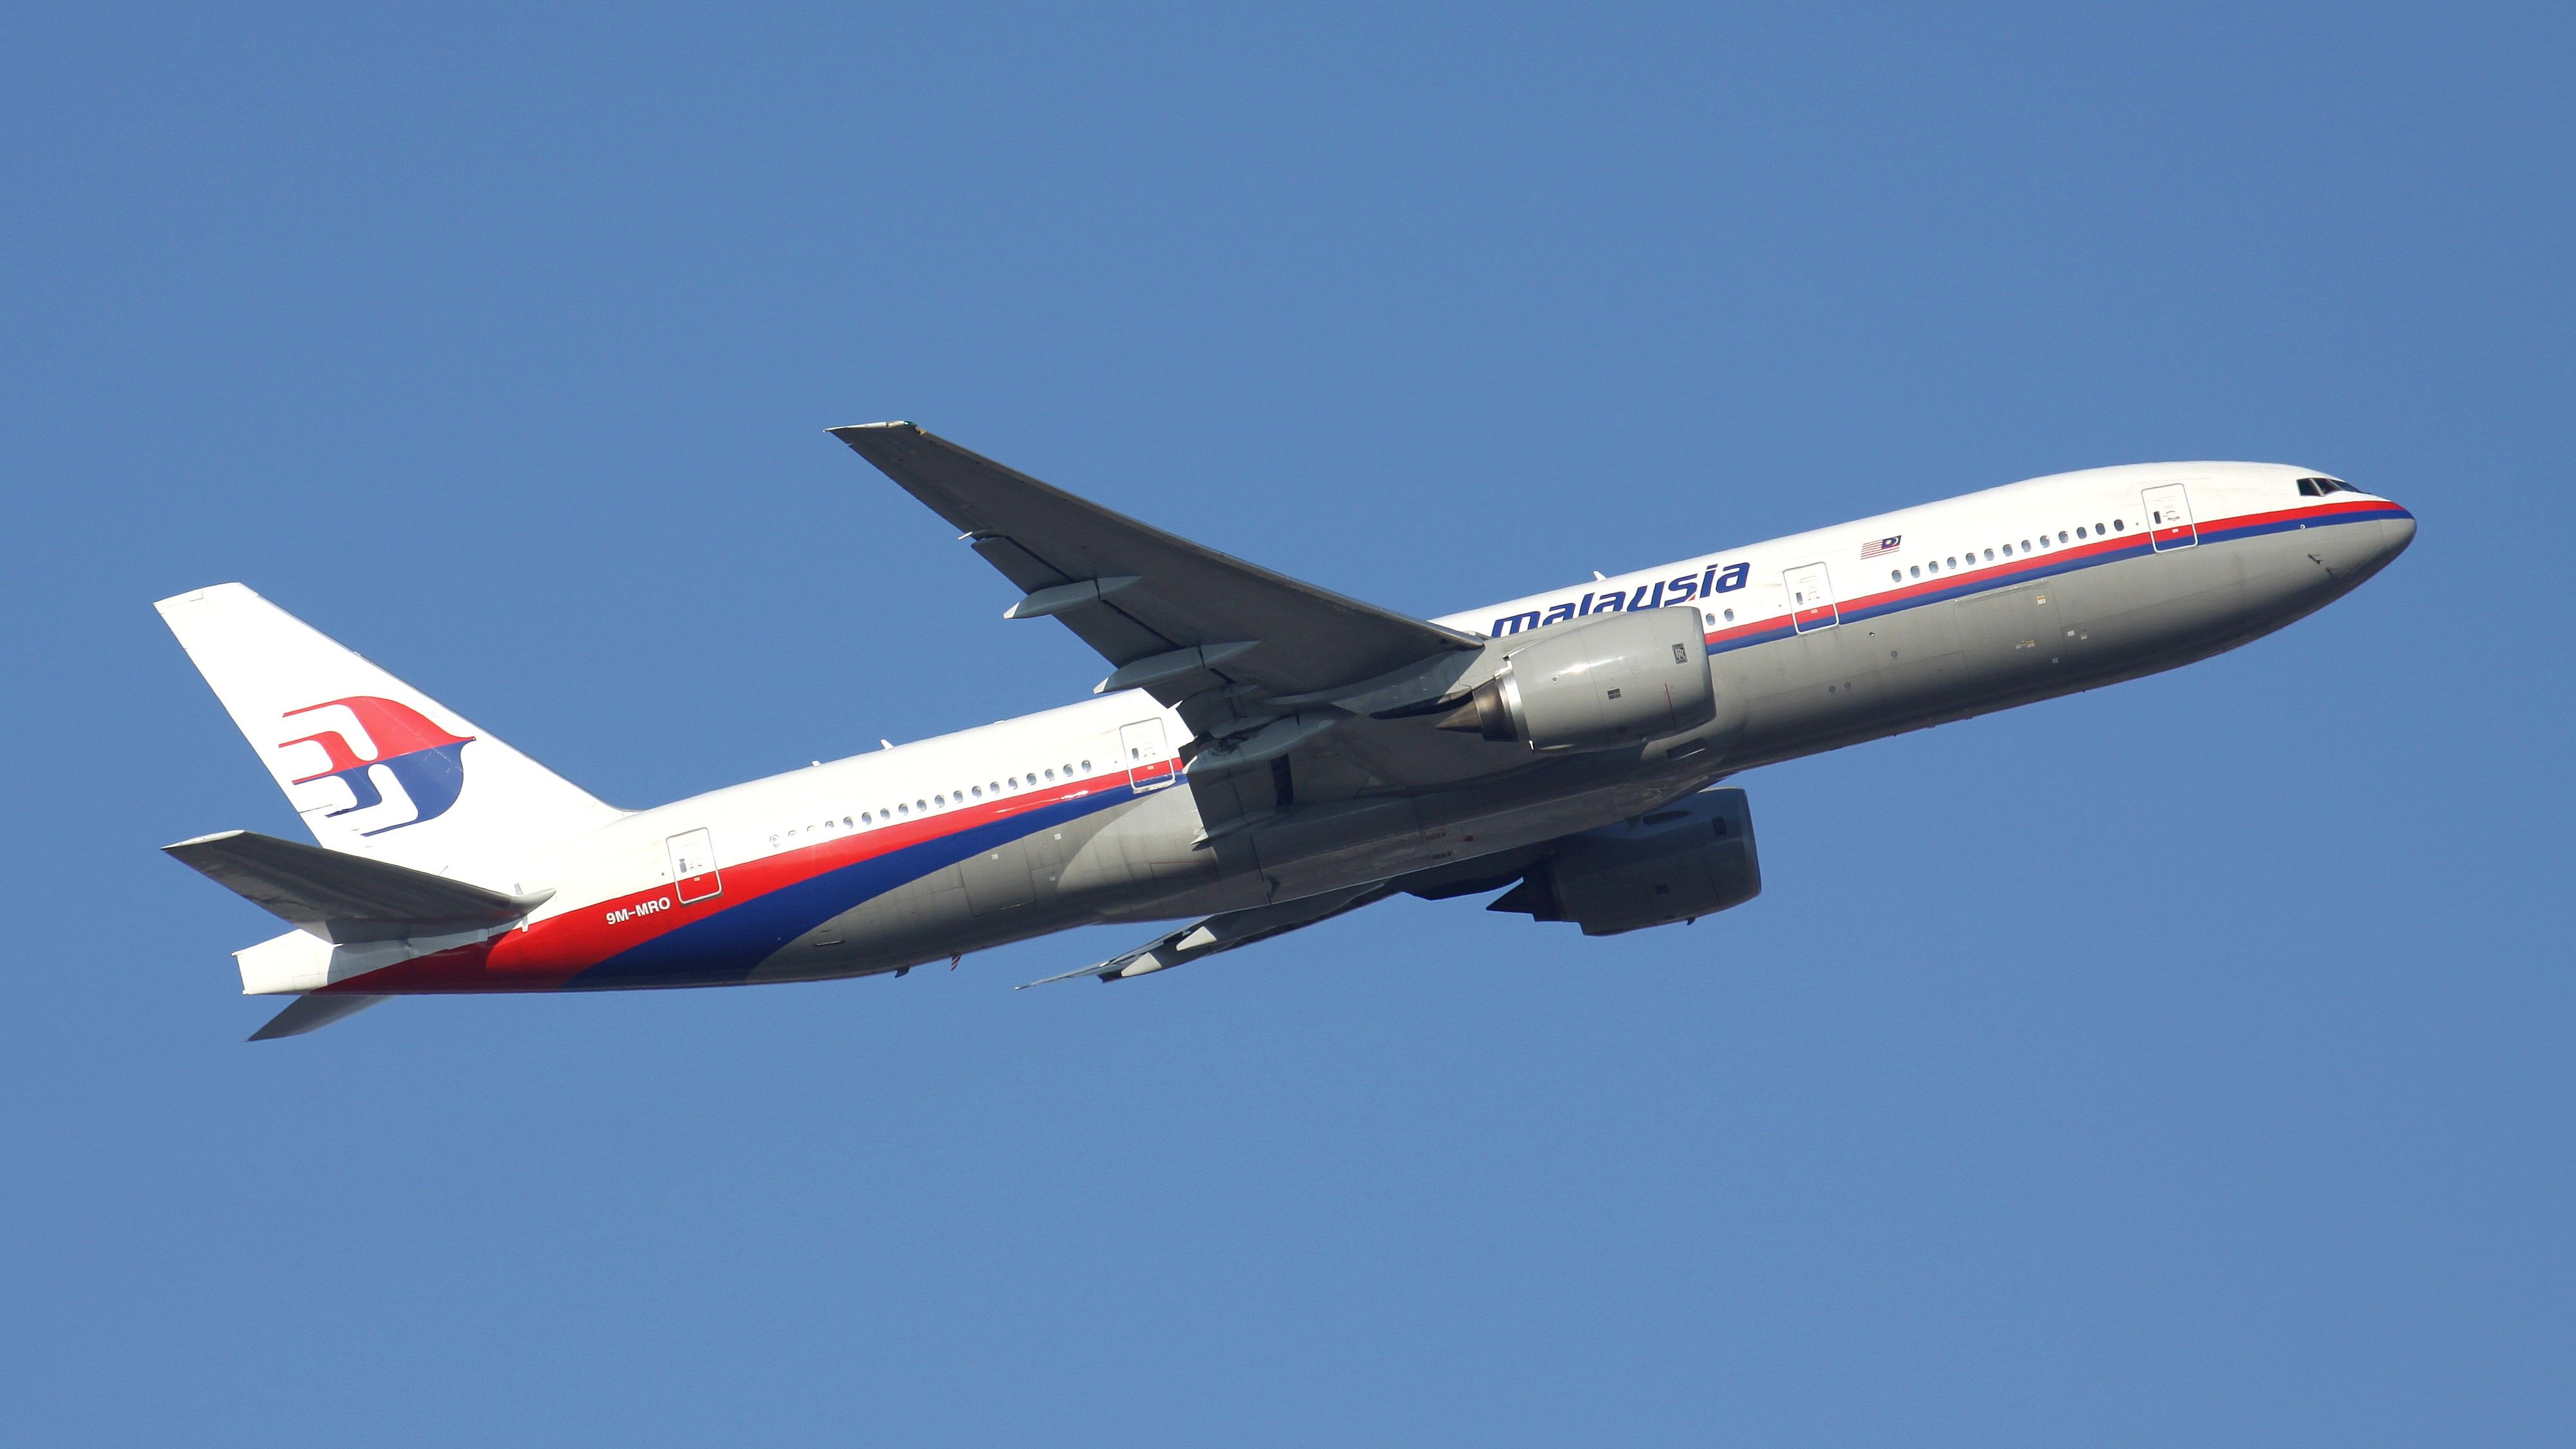 A Malaysia Airlines Boeing 777 Flying in the sky.